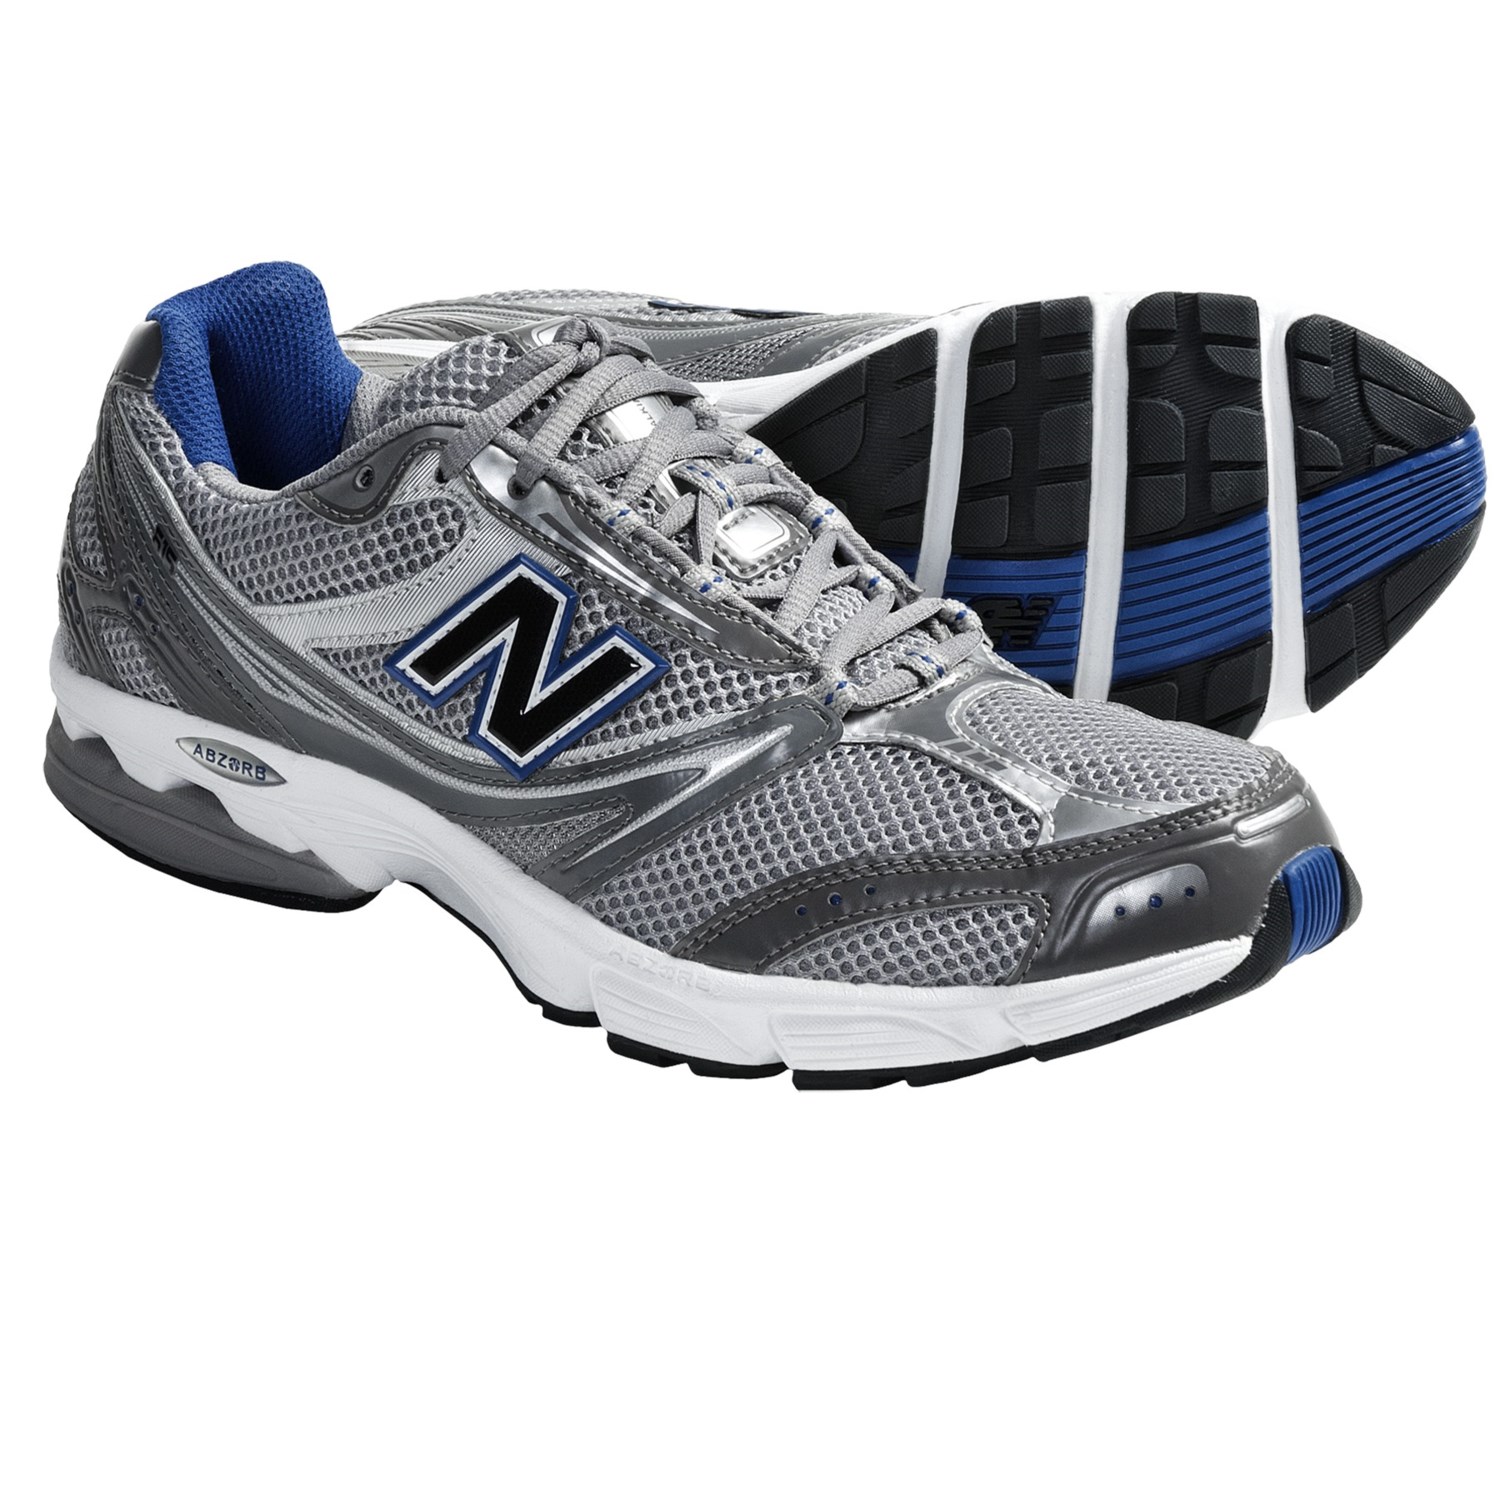 New Balance MW615 Fitness Walking Shoes (For Men) 4823N - Save 29%